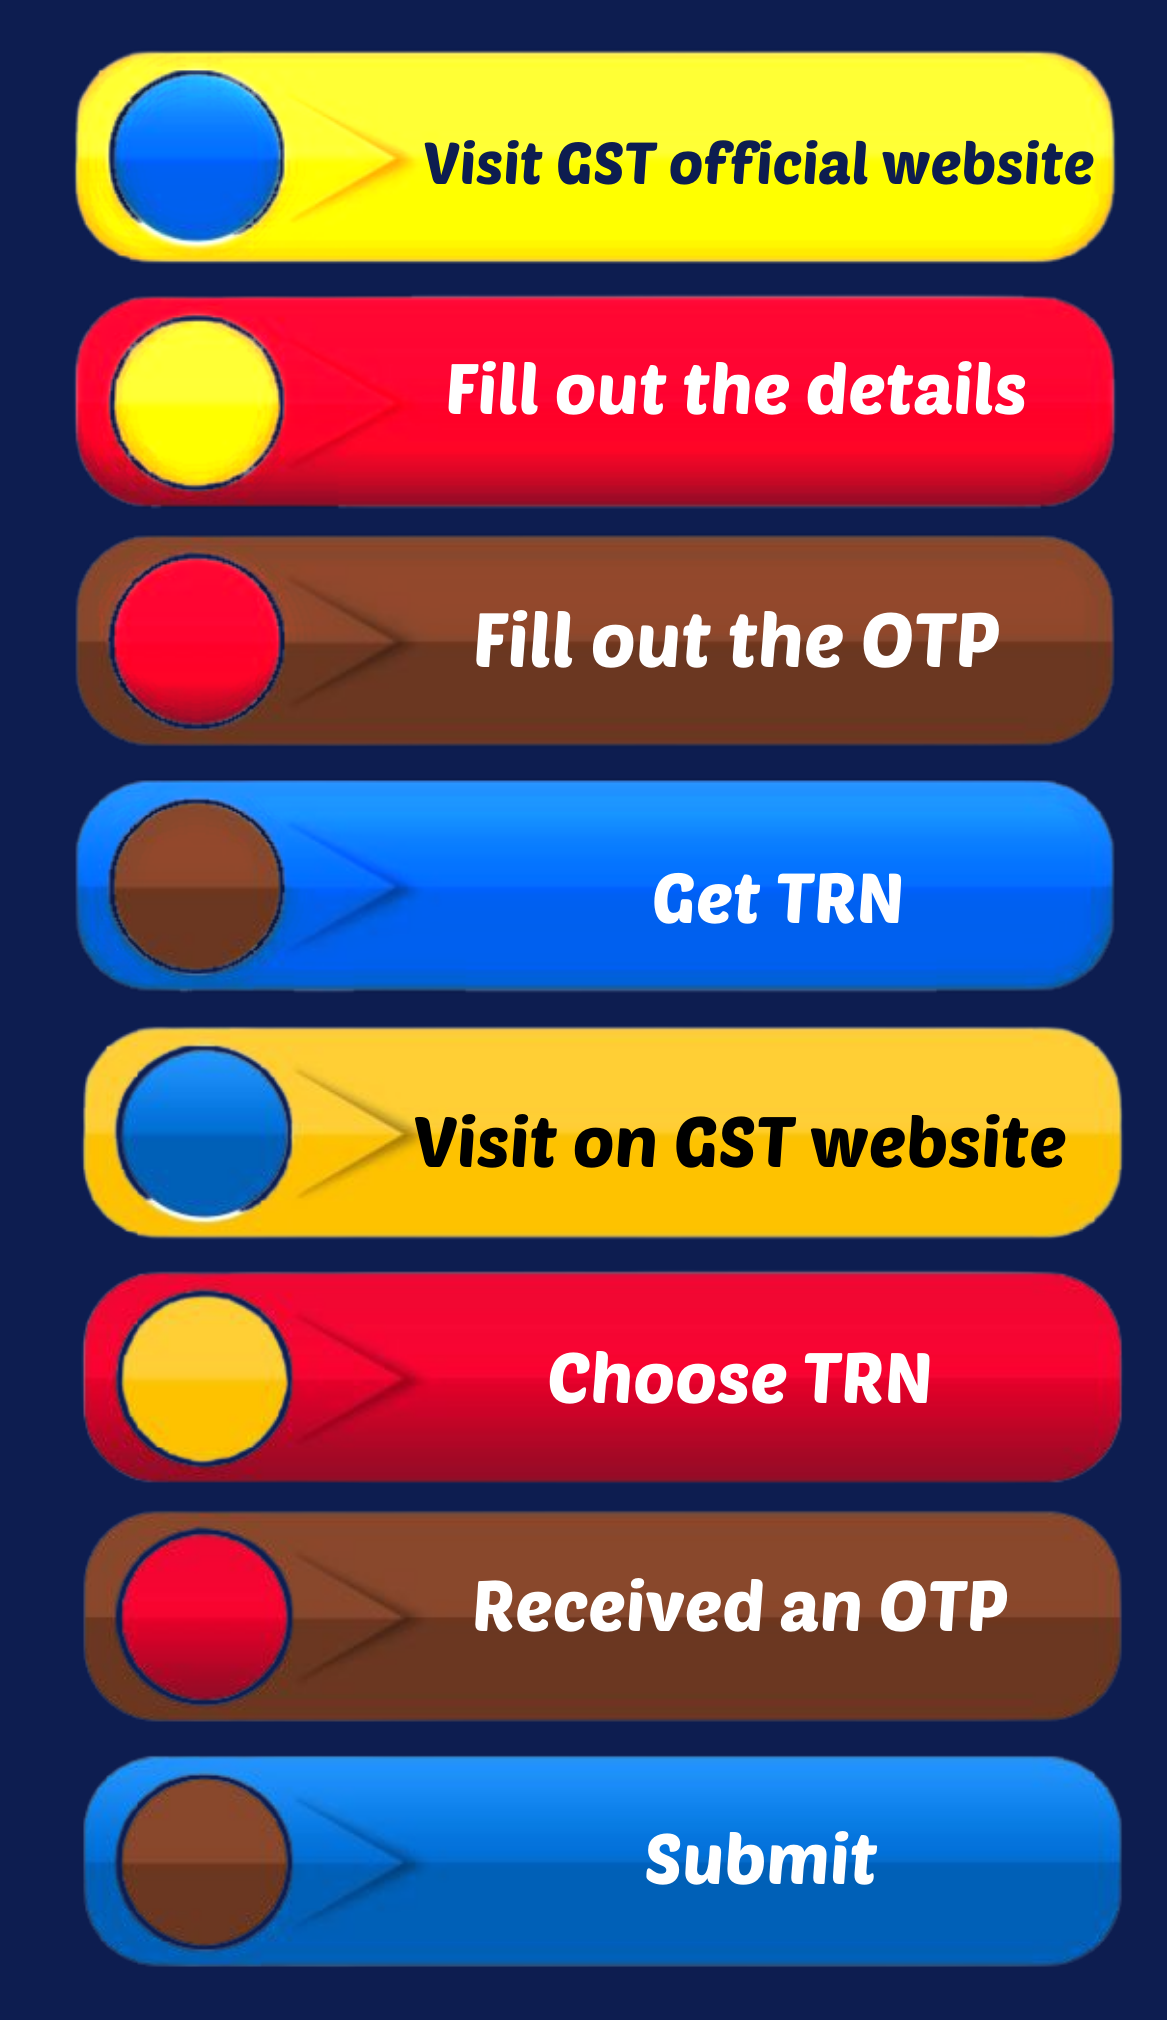 Process of GST Registration in India